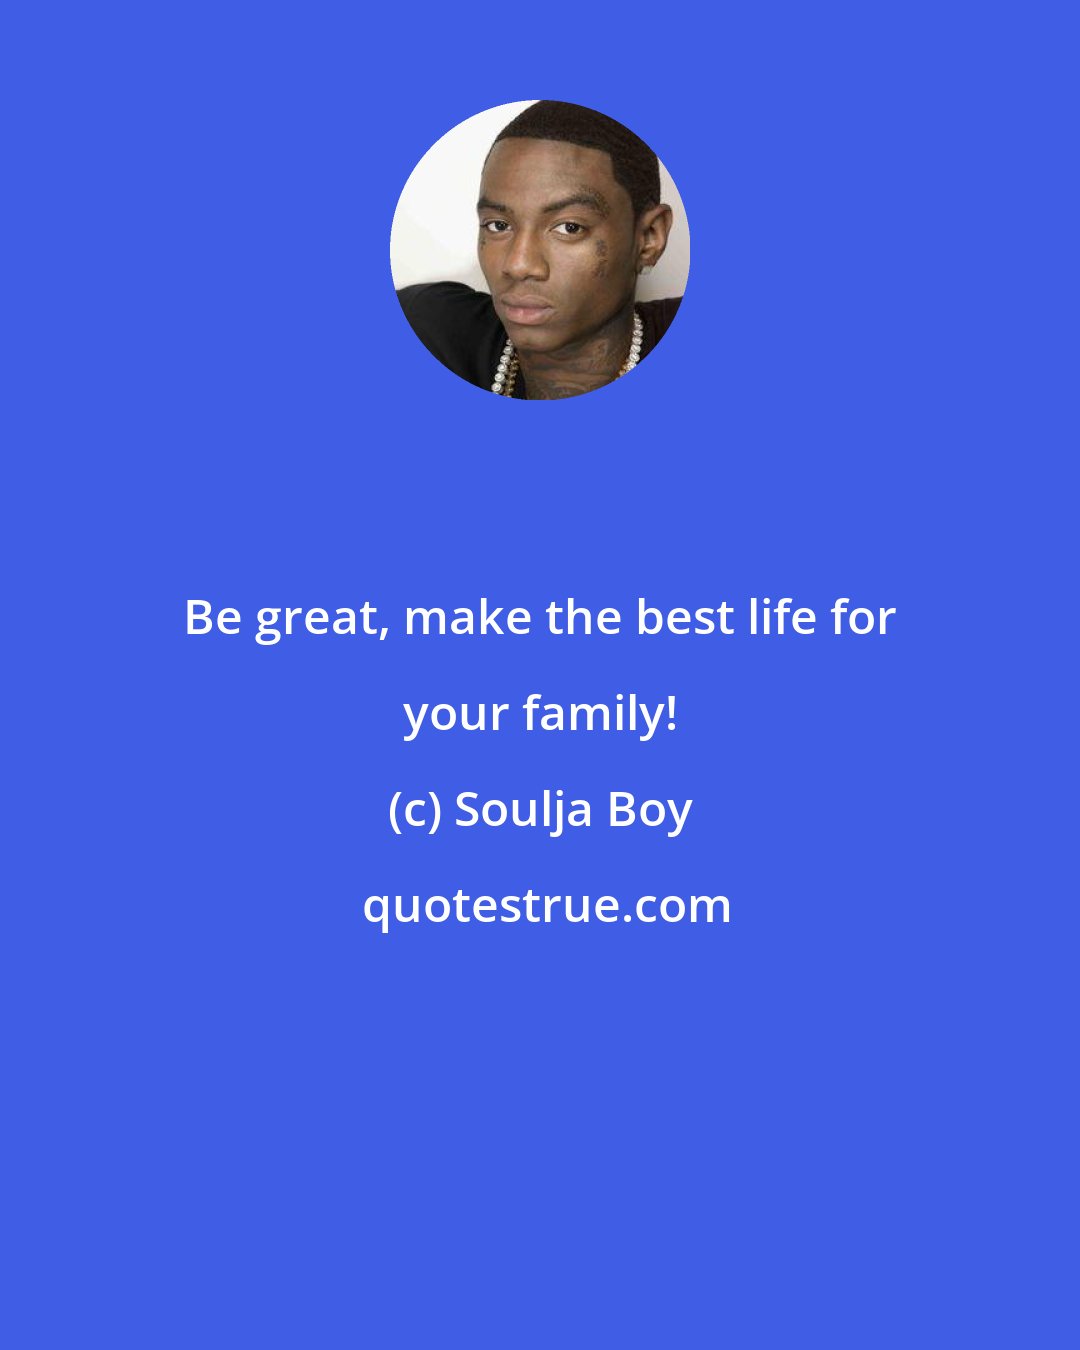 Soulja Boy: Be great, make the best life for your family!